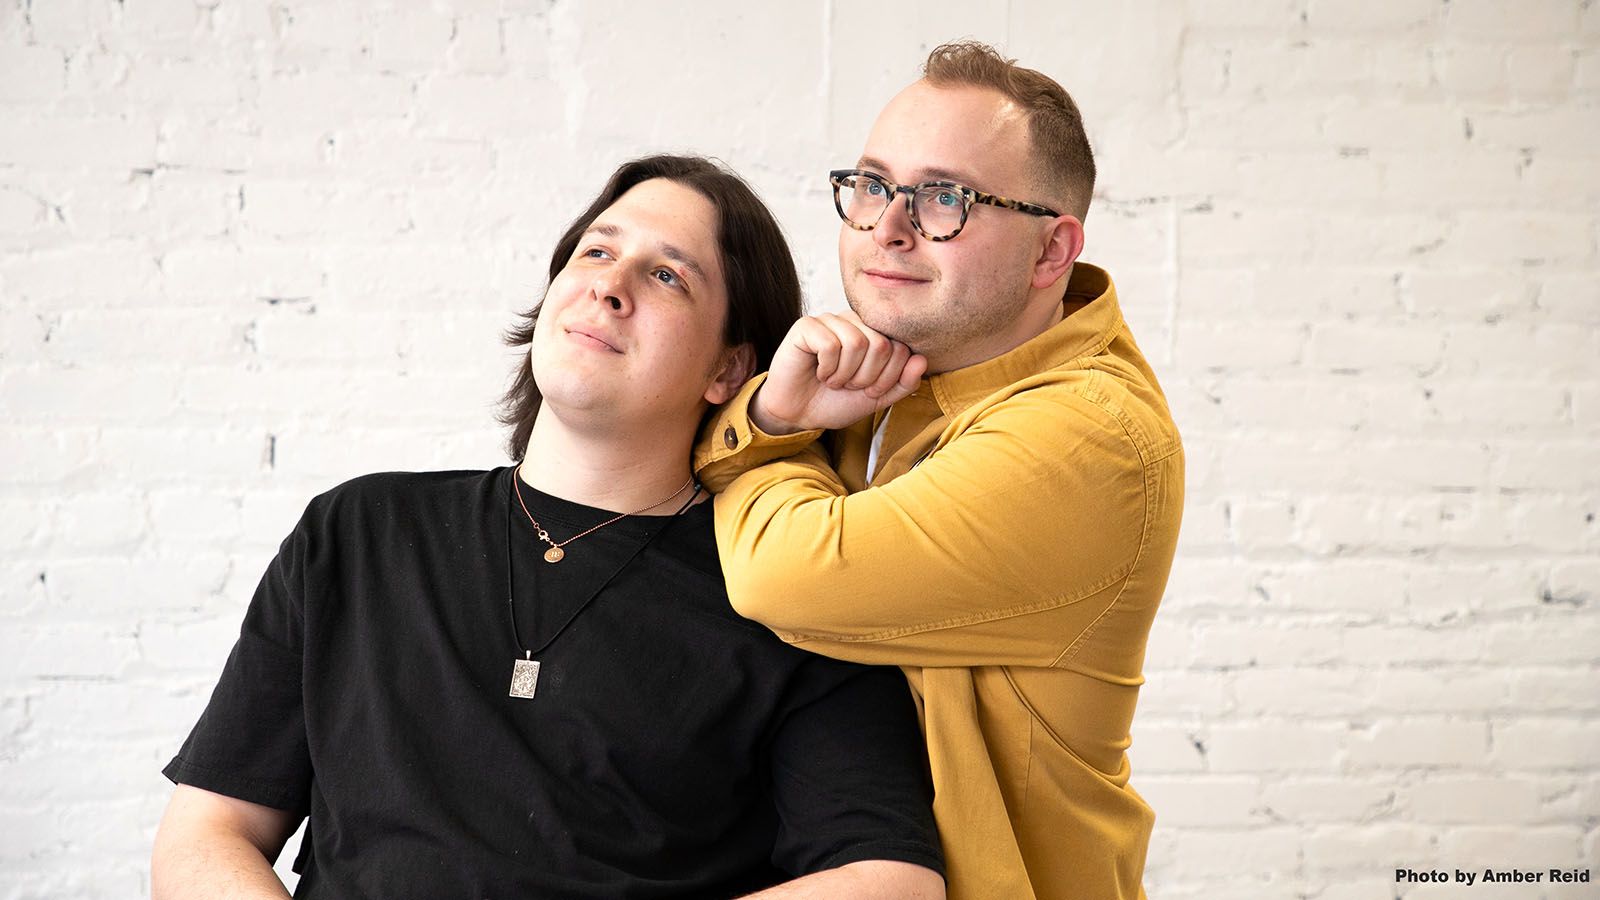 Dakota Norman, left, and Gavin Thomas Drew conceived the one-man show "Equals."